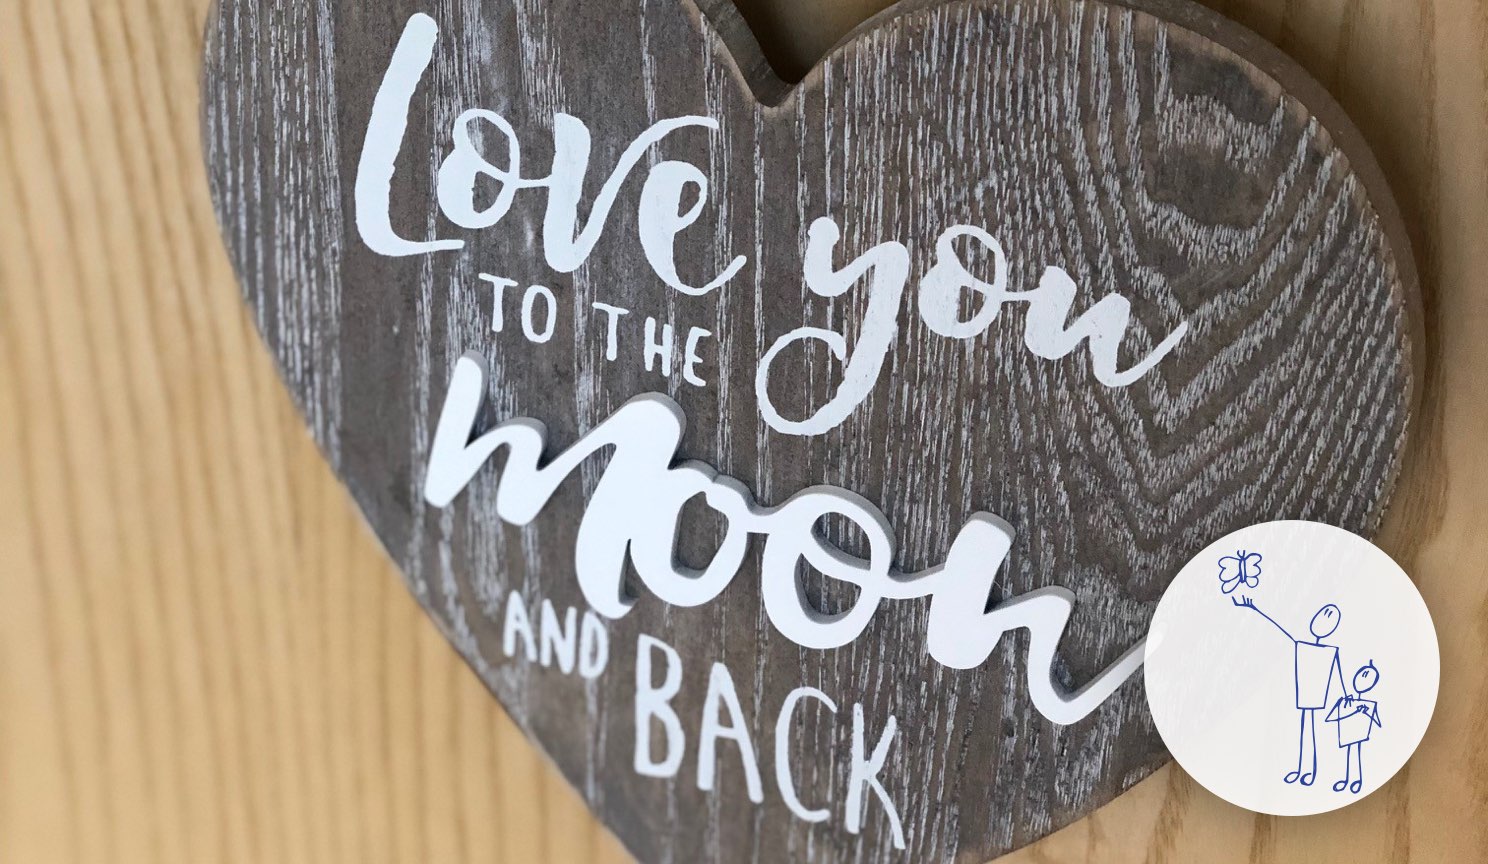 Wooden heart sign with words "Love you to the moon and back"